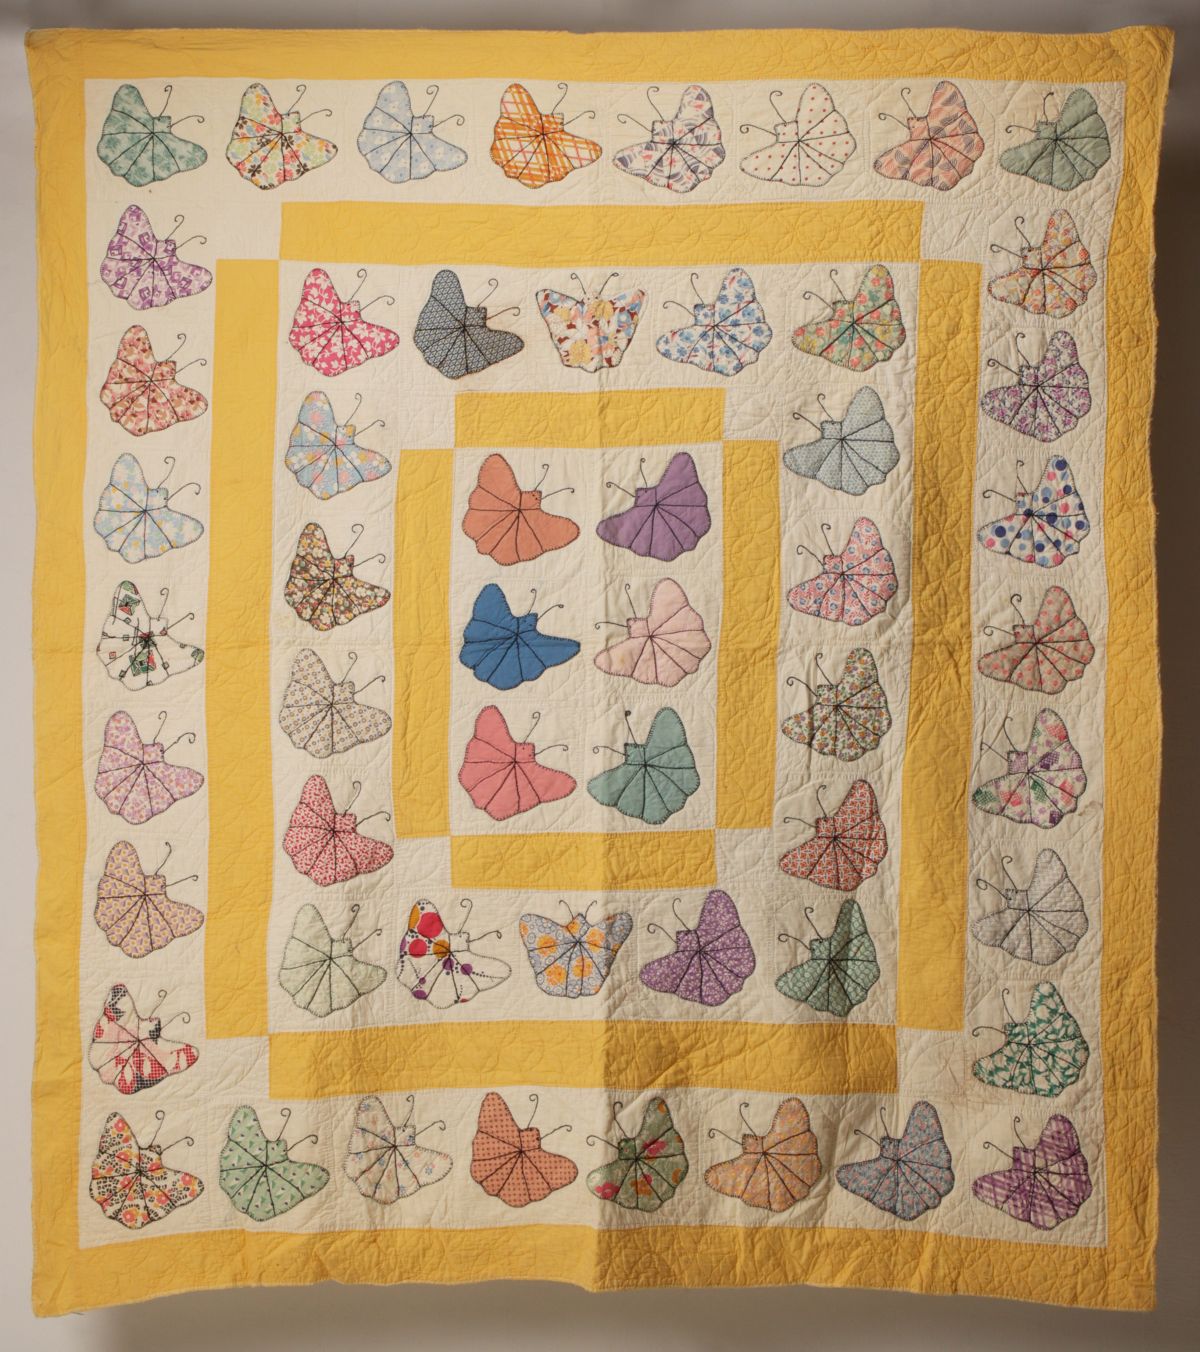 A 1930s BUTTERFLY EMBROIDERED APPLIQUE QUILT